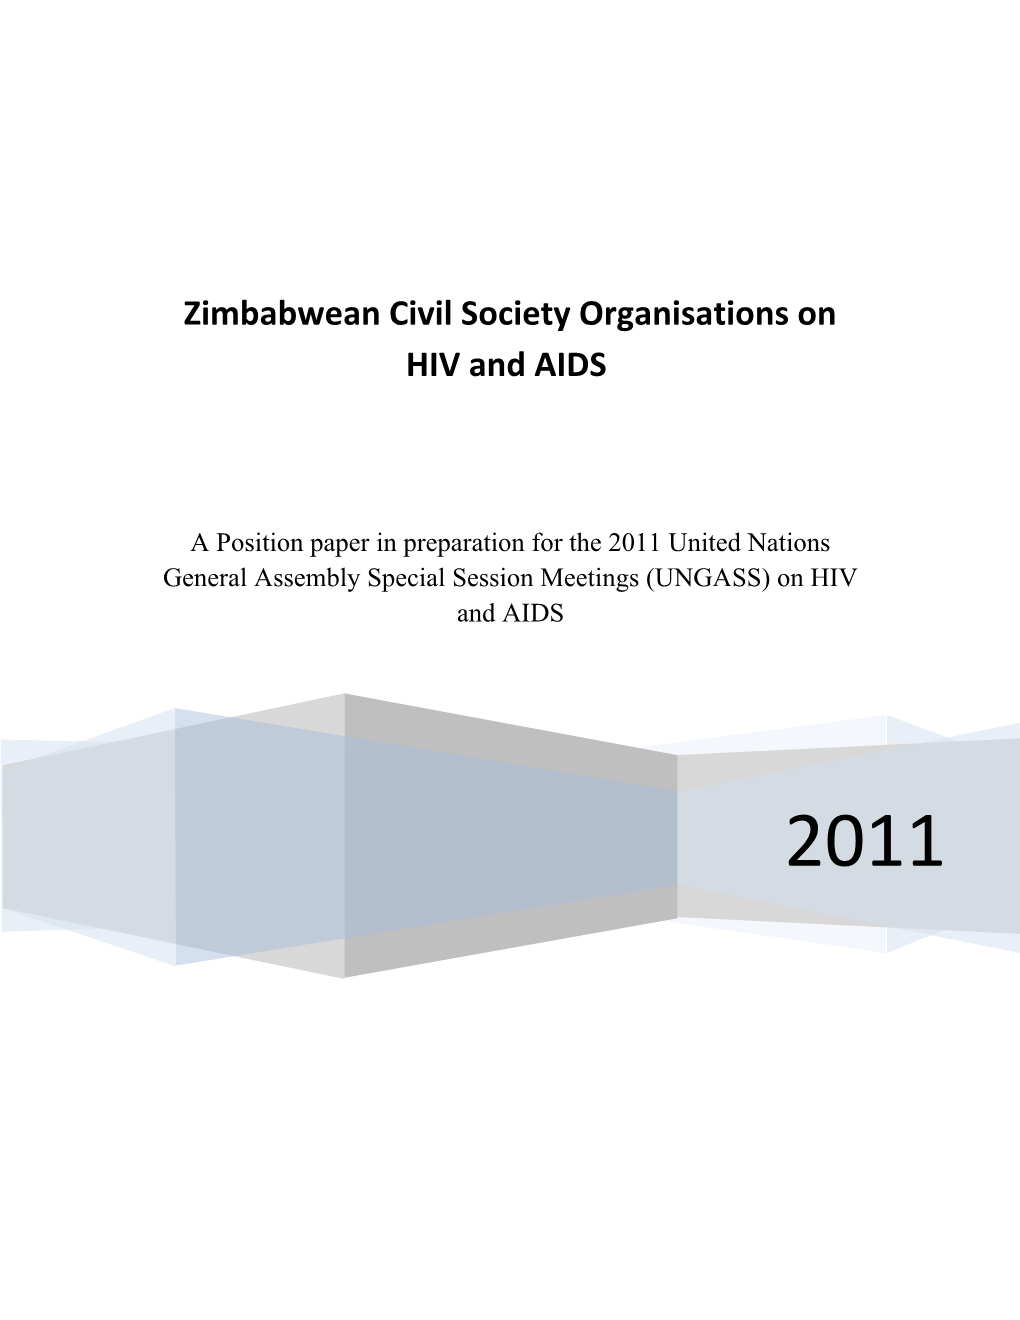 HIV and AIDS Civil Society Organisations